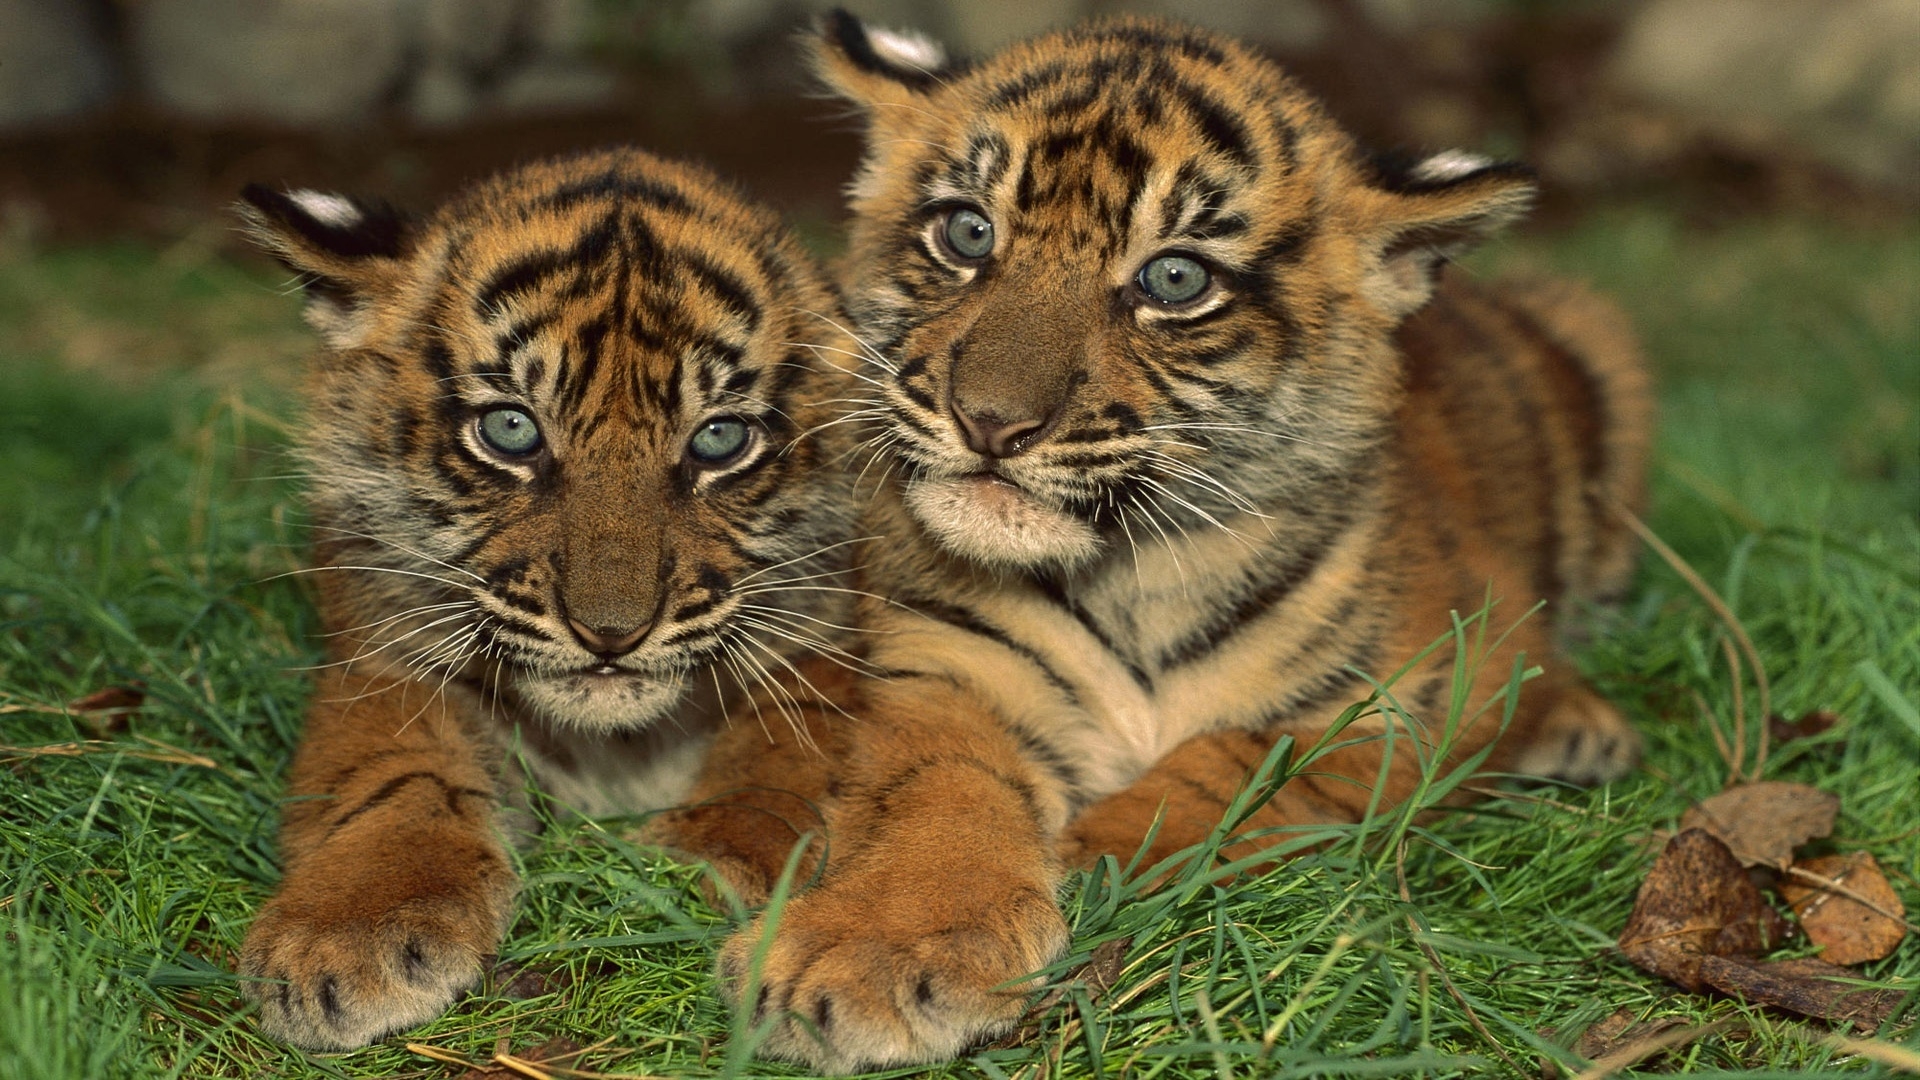 Two Young Tigers for 1920 x 1080 HDTV 1080p resolution